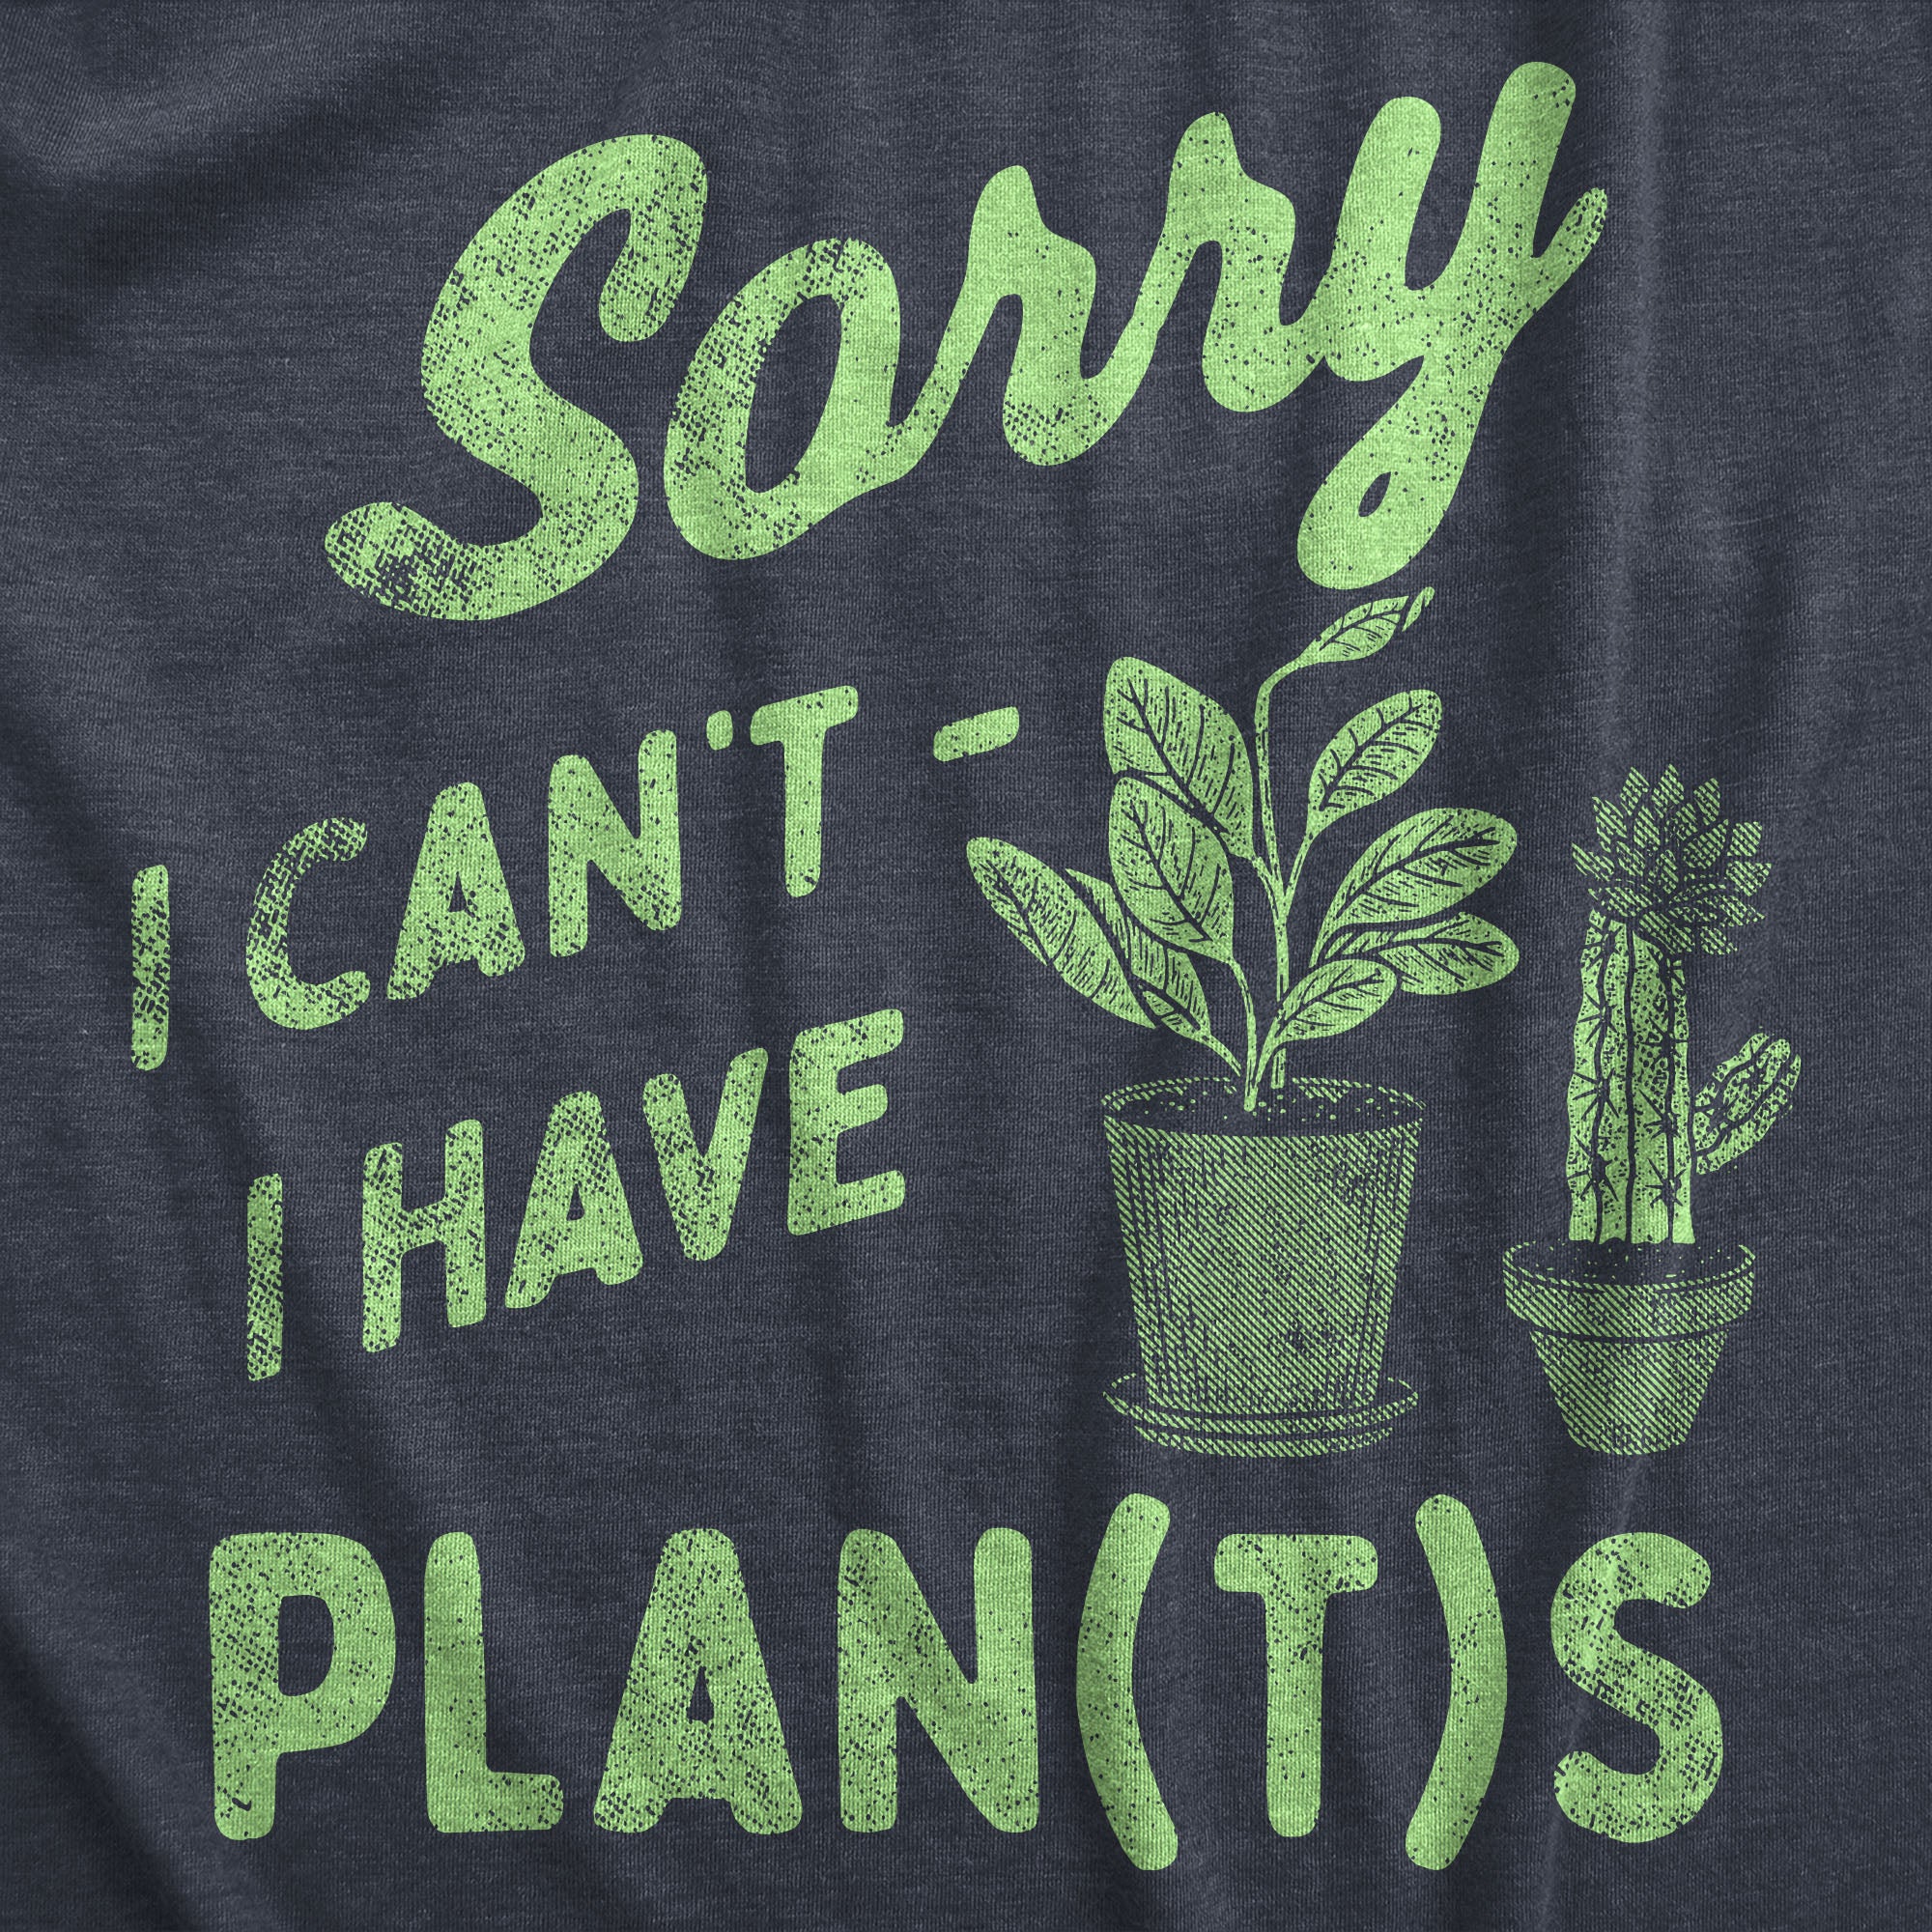 Funny Heather Navy - PLANTS Sorry I Cant I Have Plants Mens T Shirt Nerdy Sarcastic Tee